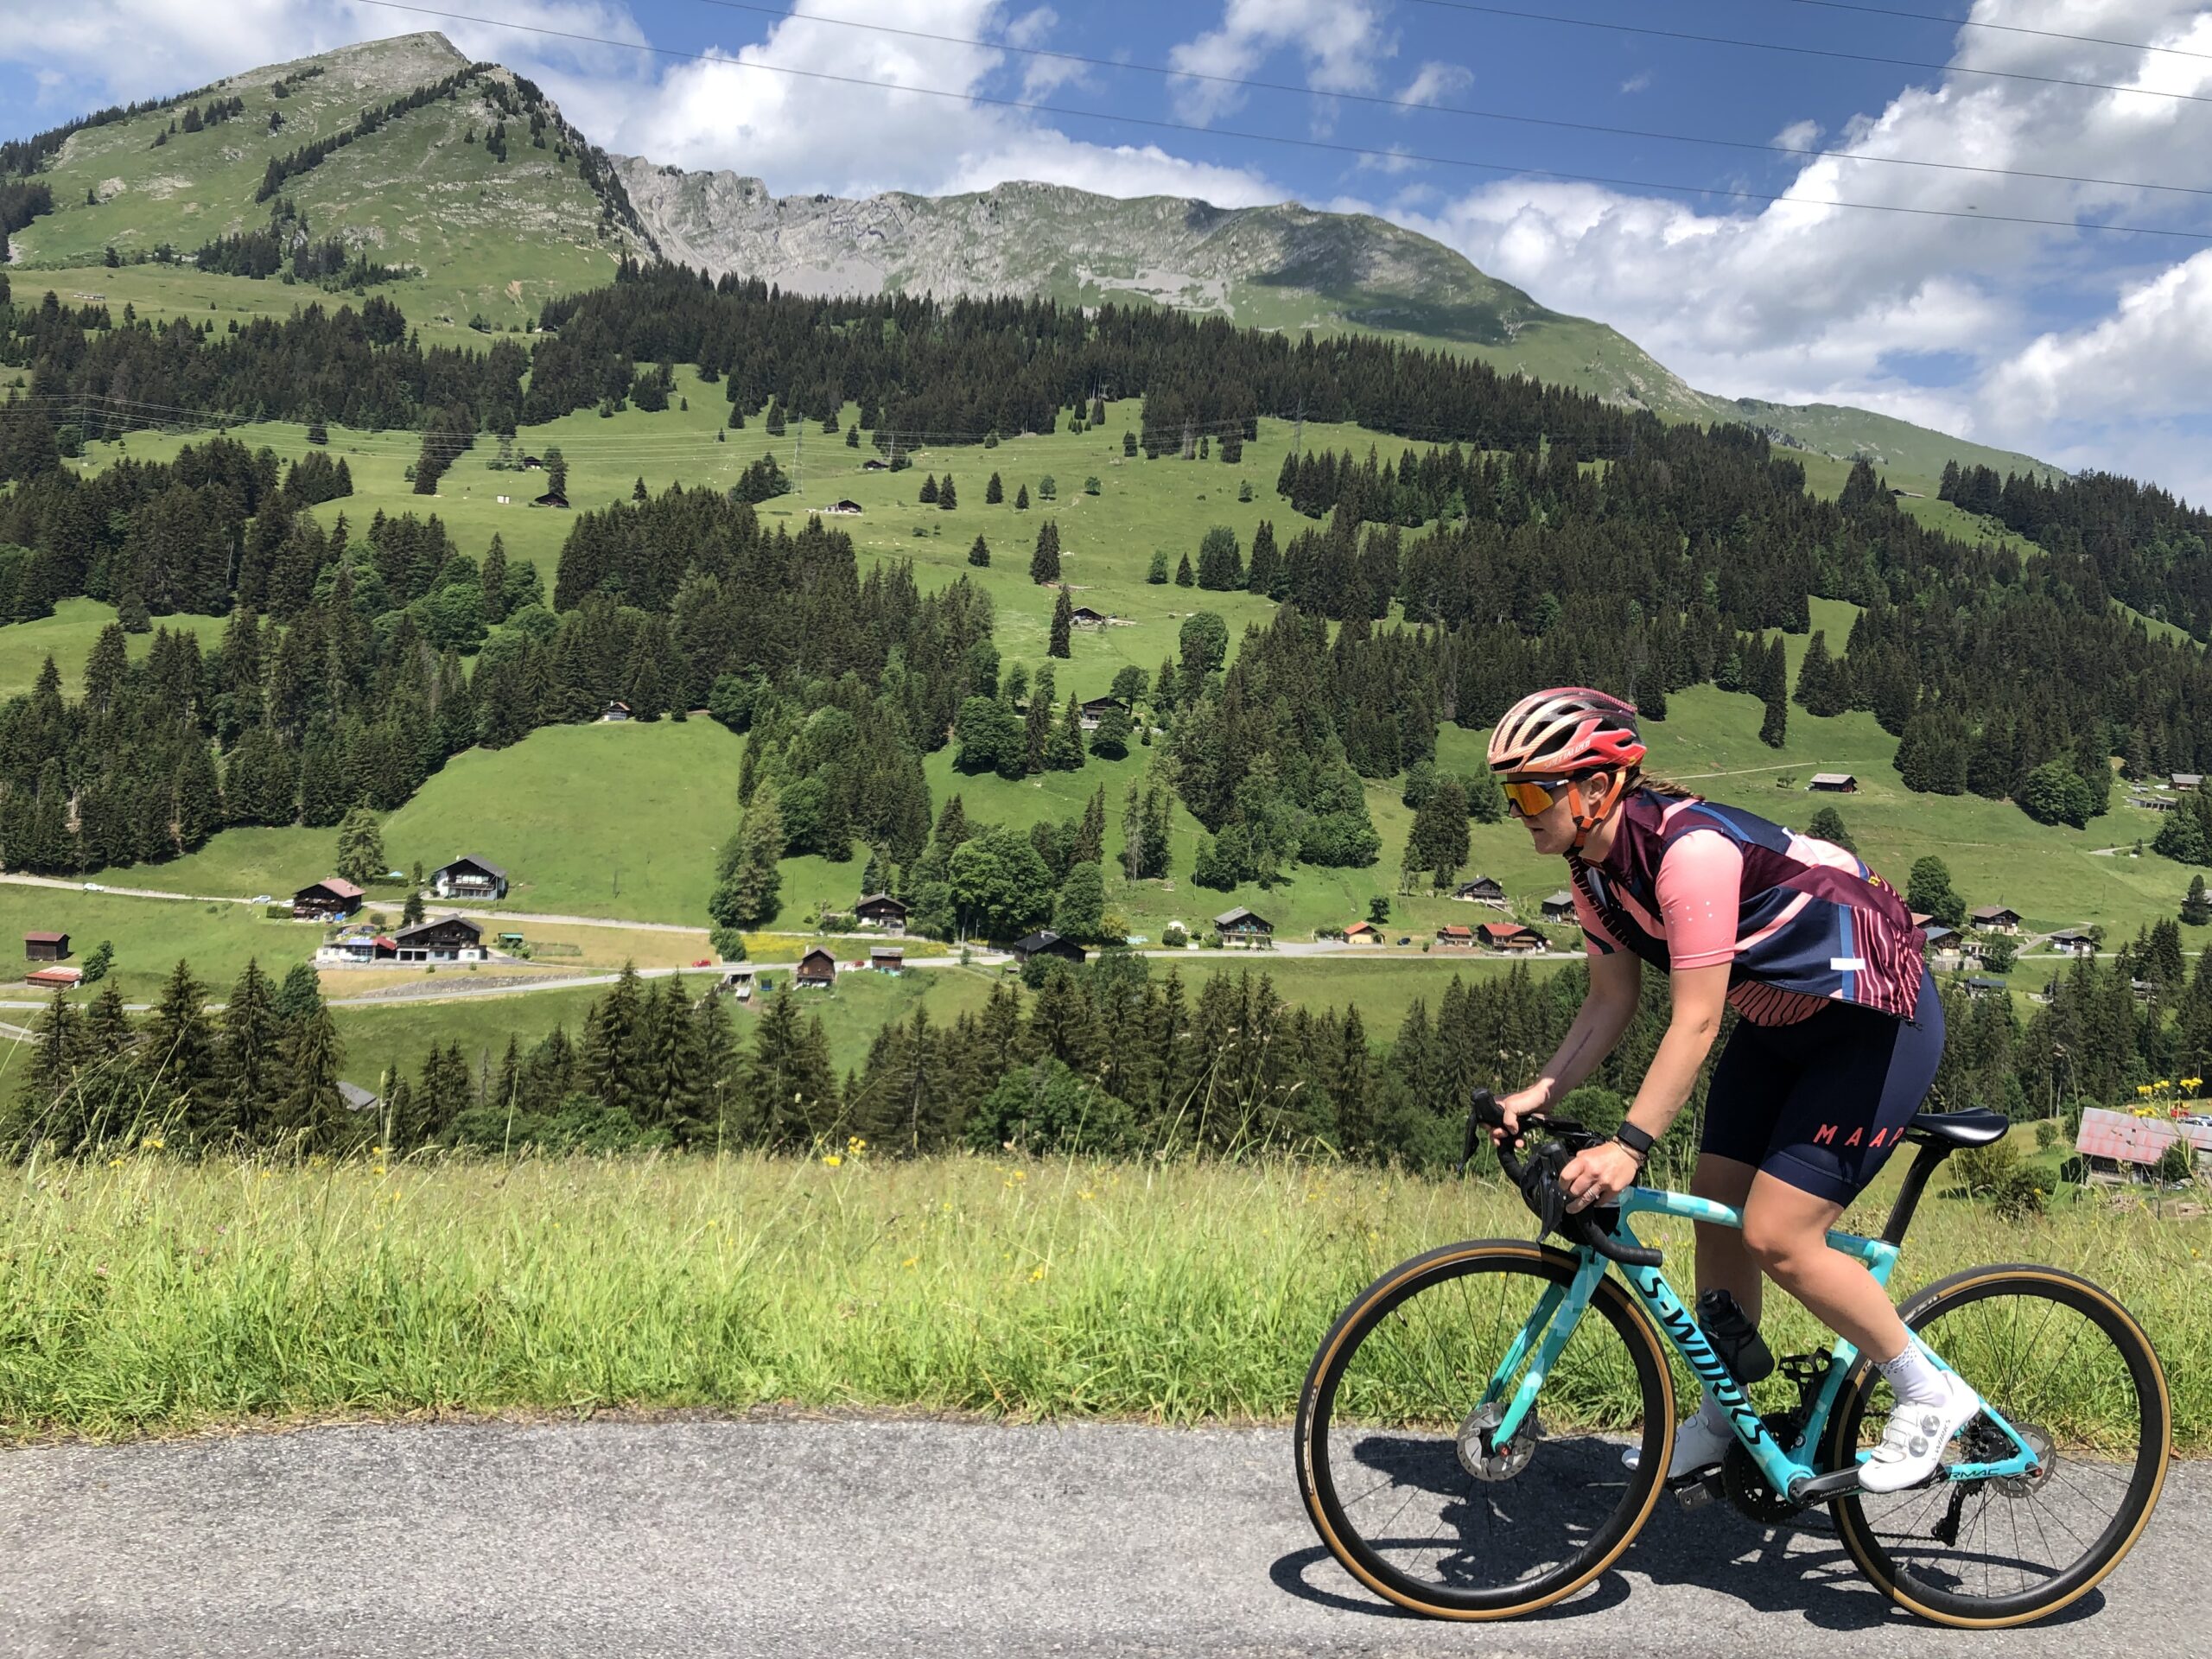 Female cyclist in a pink and navy kit riding a turquoise road bike on a scenic mountain road, with lush green hills and charming alpine cottages in the background under a bright blue sky.